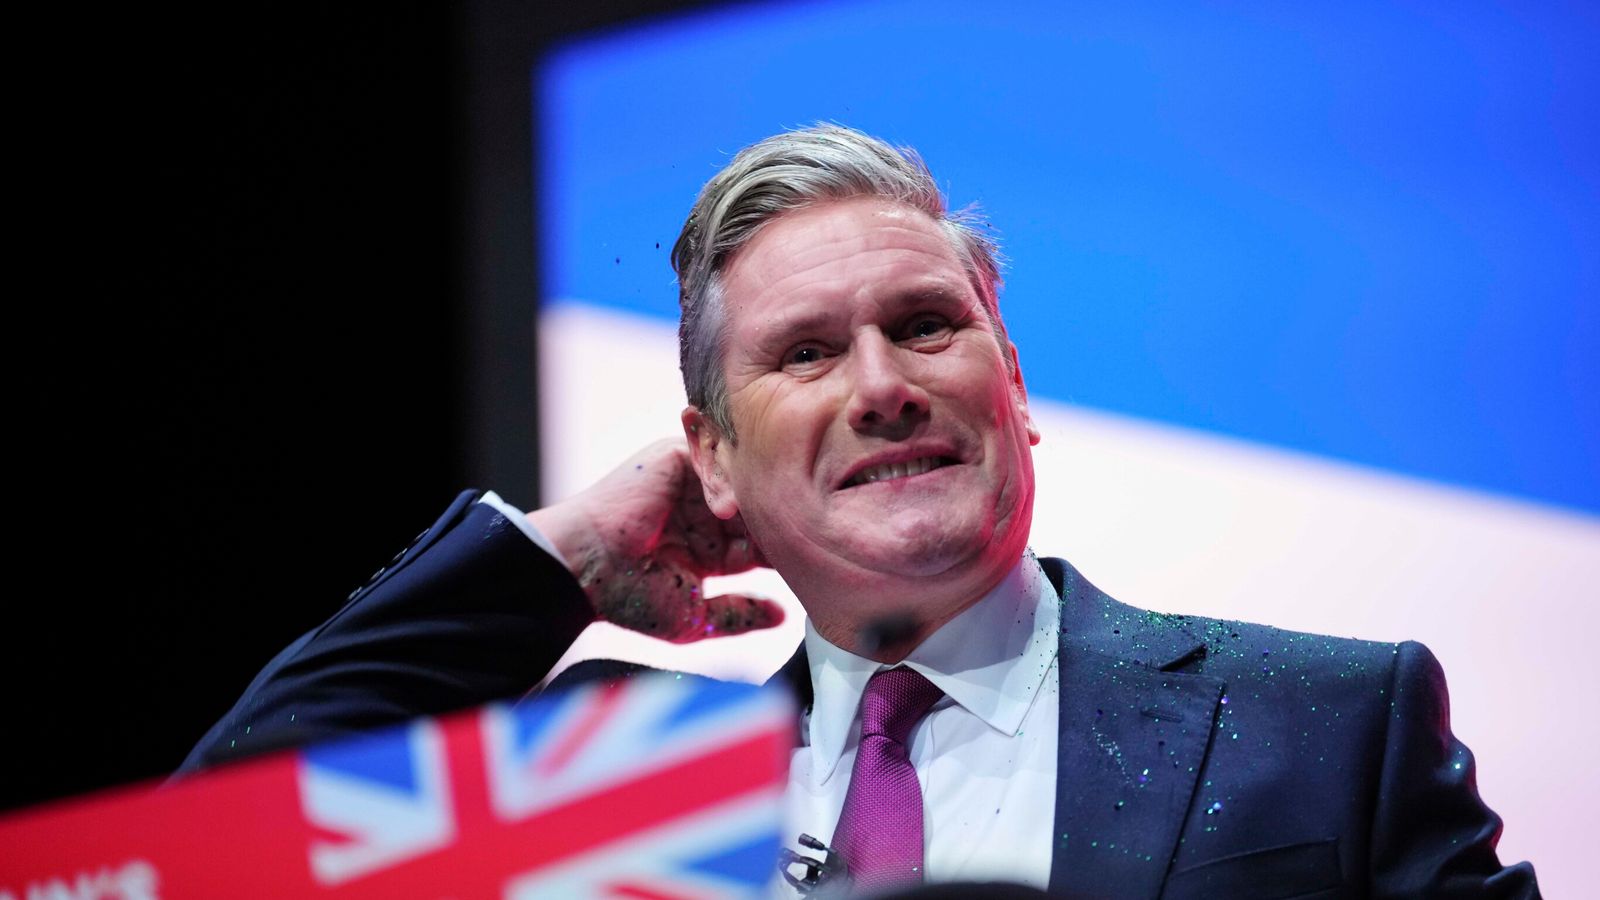 Keir Starmer makes pitch to Tory voters looking in 'horror at descent of party'